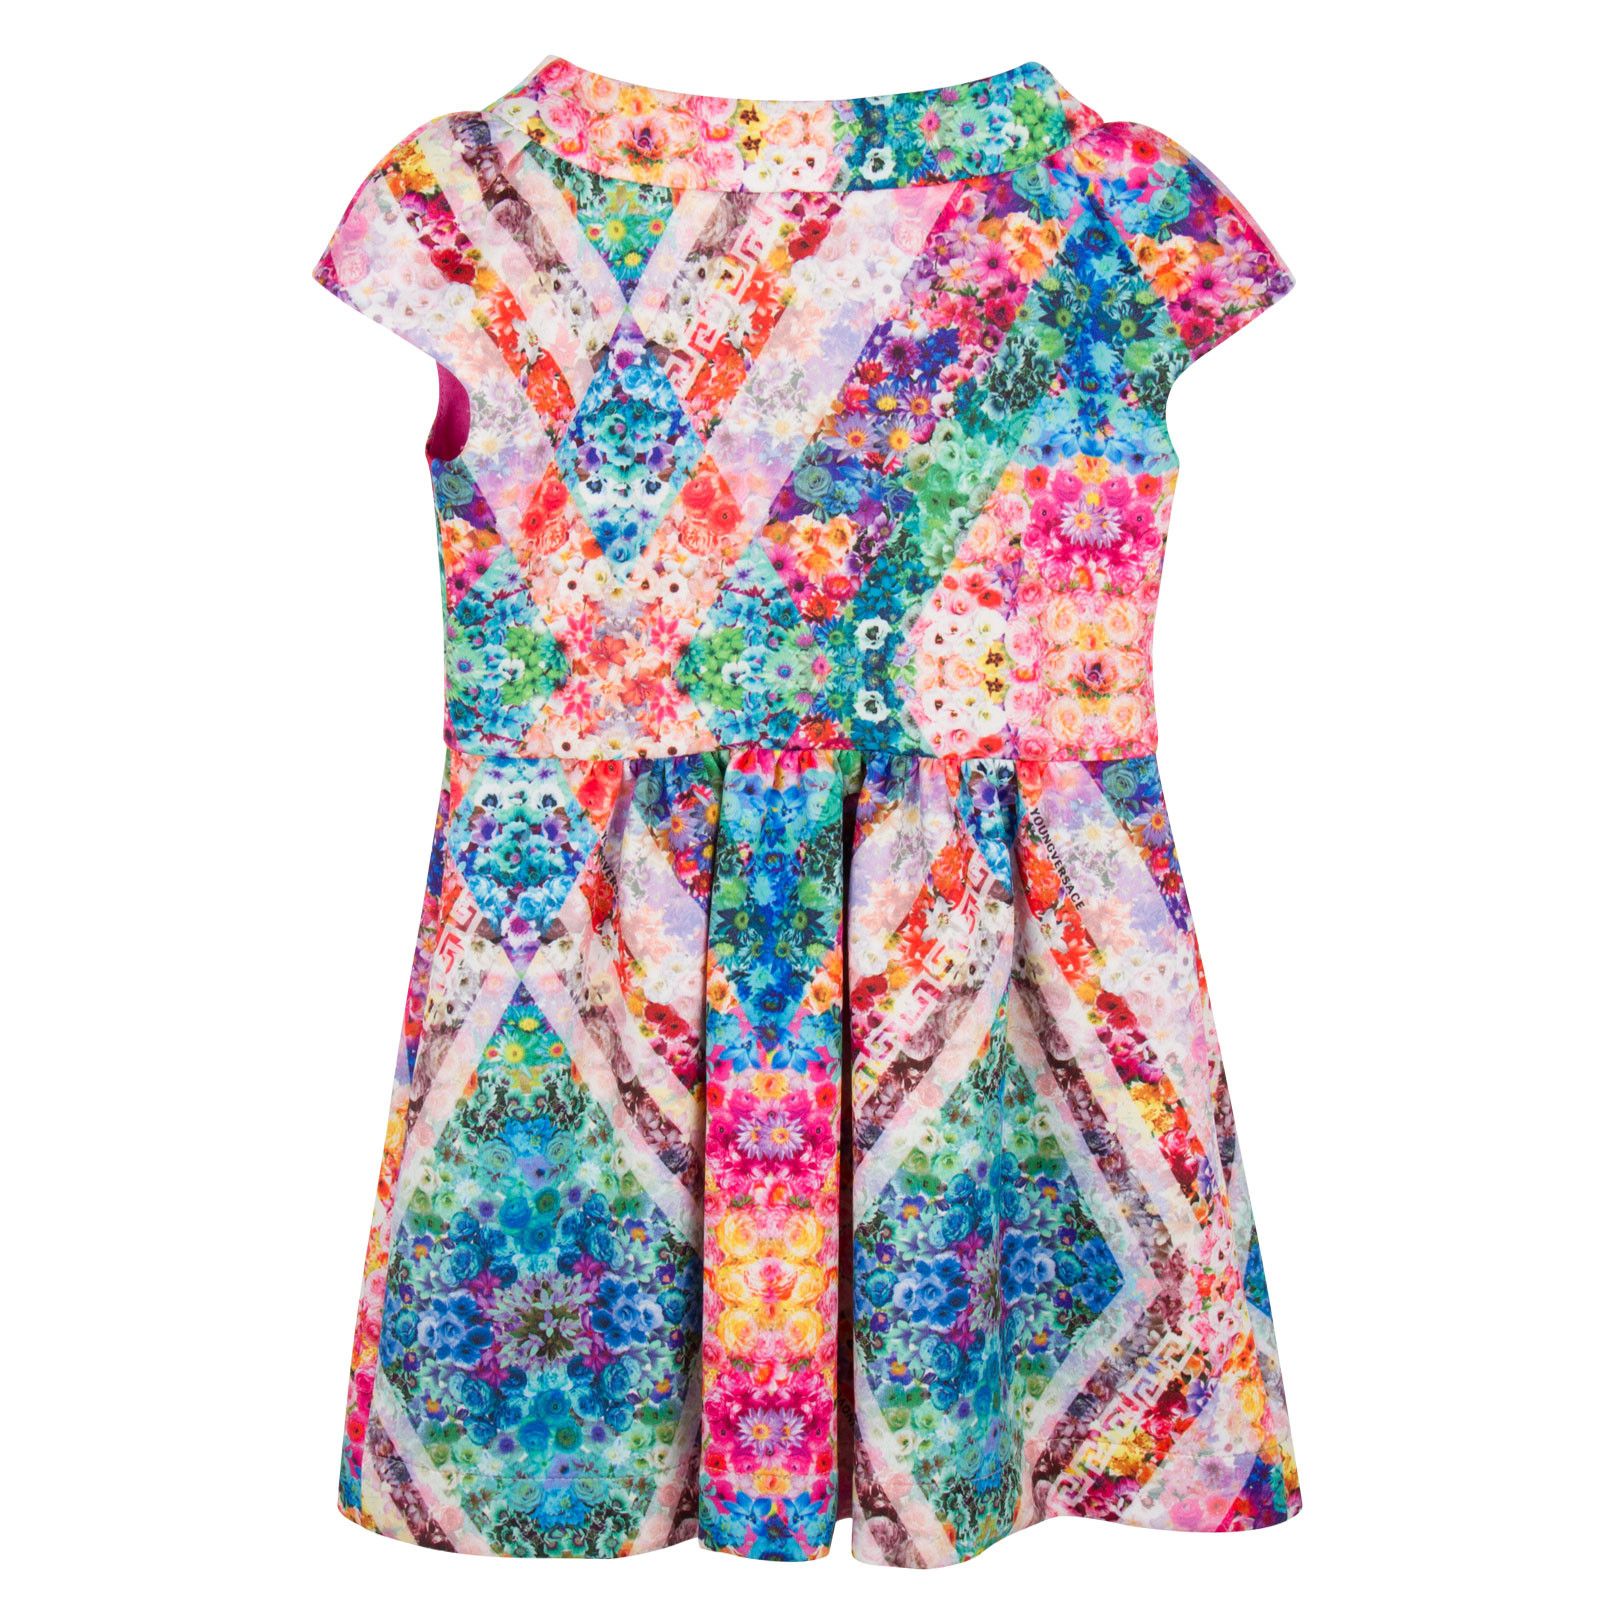 Girls Multicolor Floral Kaleidoscope Dress With Zip-up - CÉMAROSE | Children's Fashion Store - 2